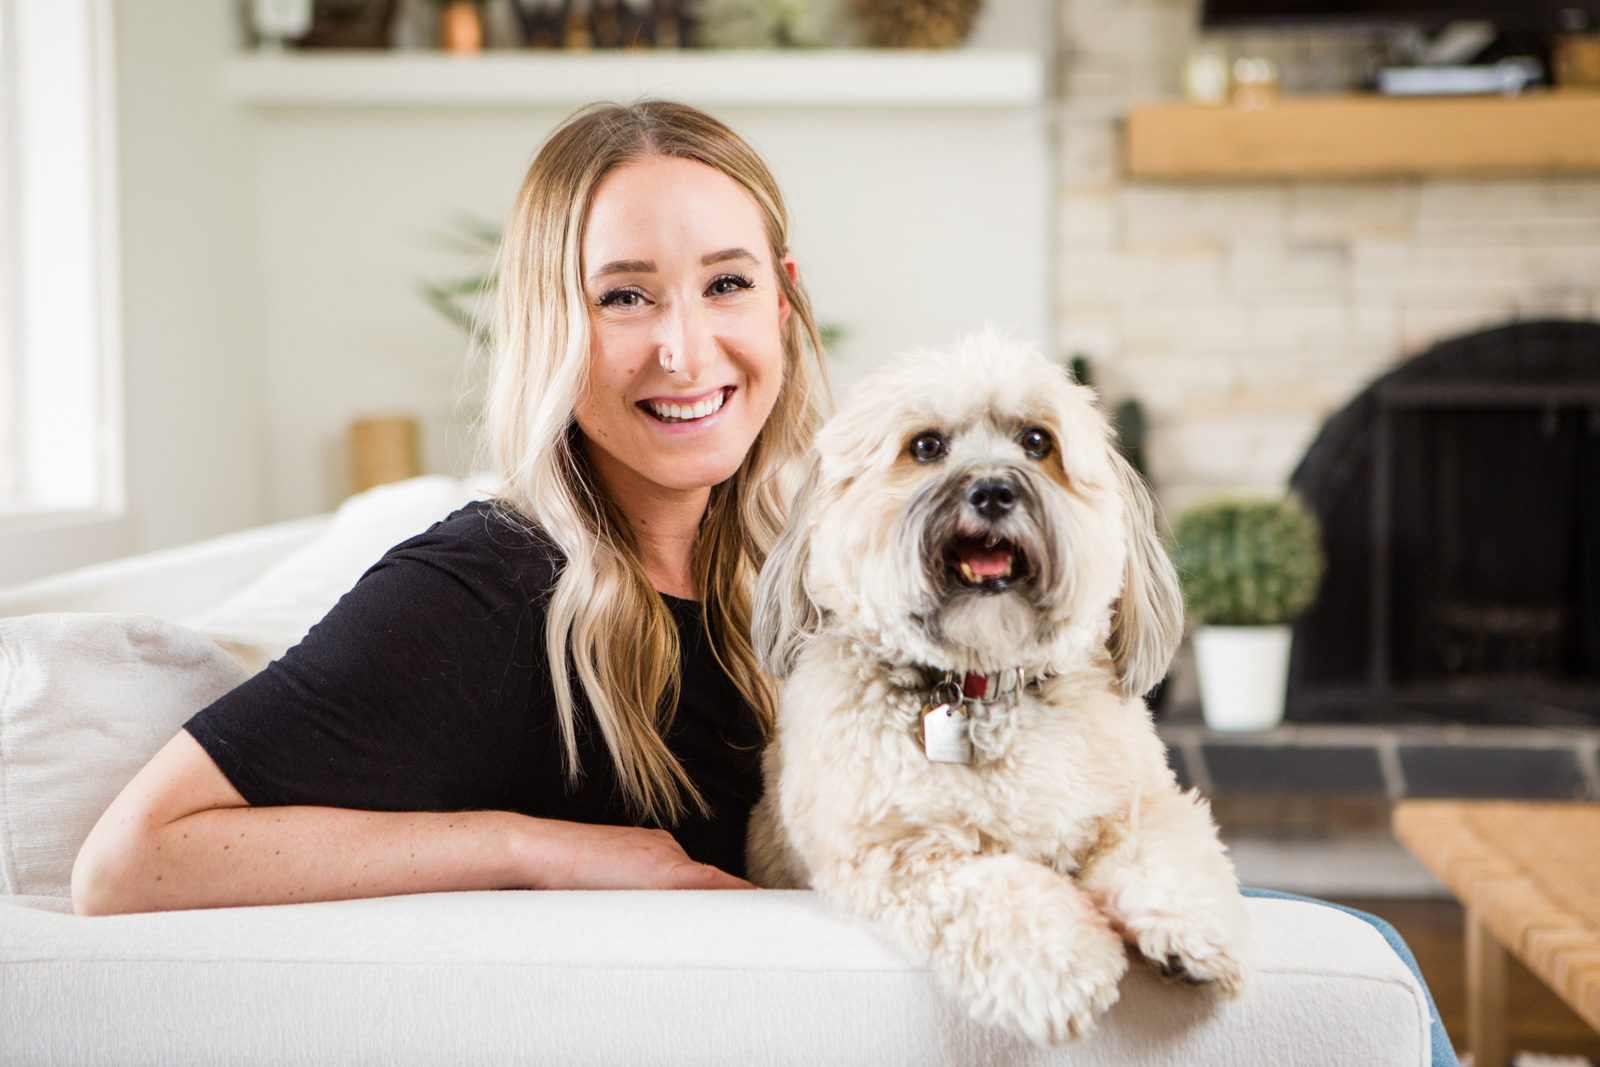 A personal brand lifestyle photo of a woman smiling with her pet